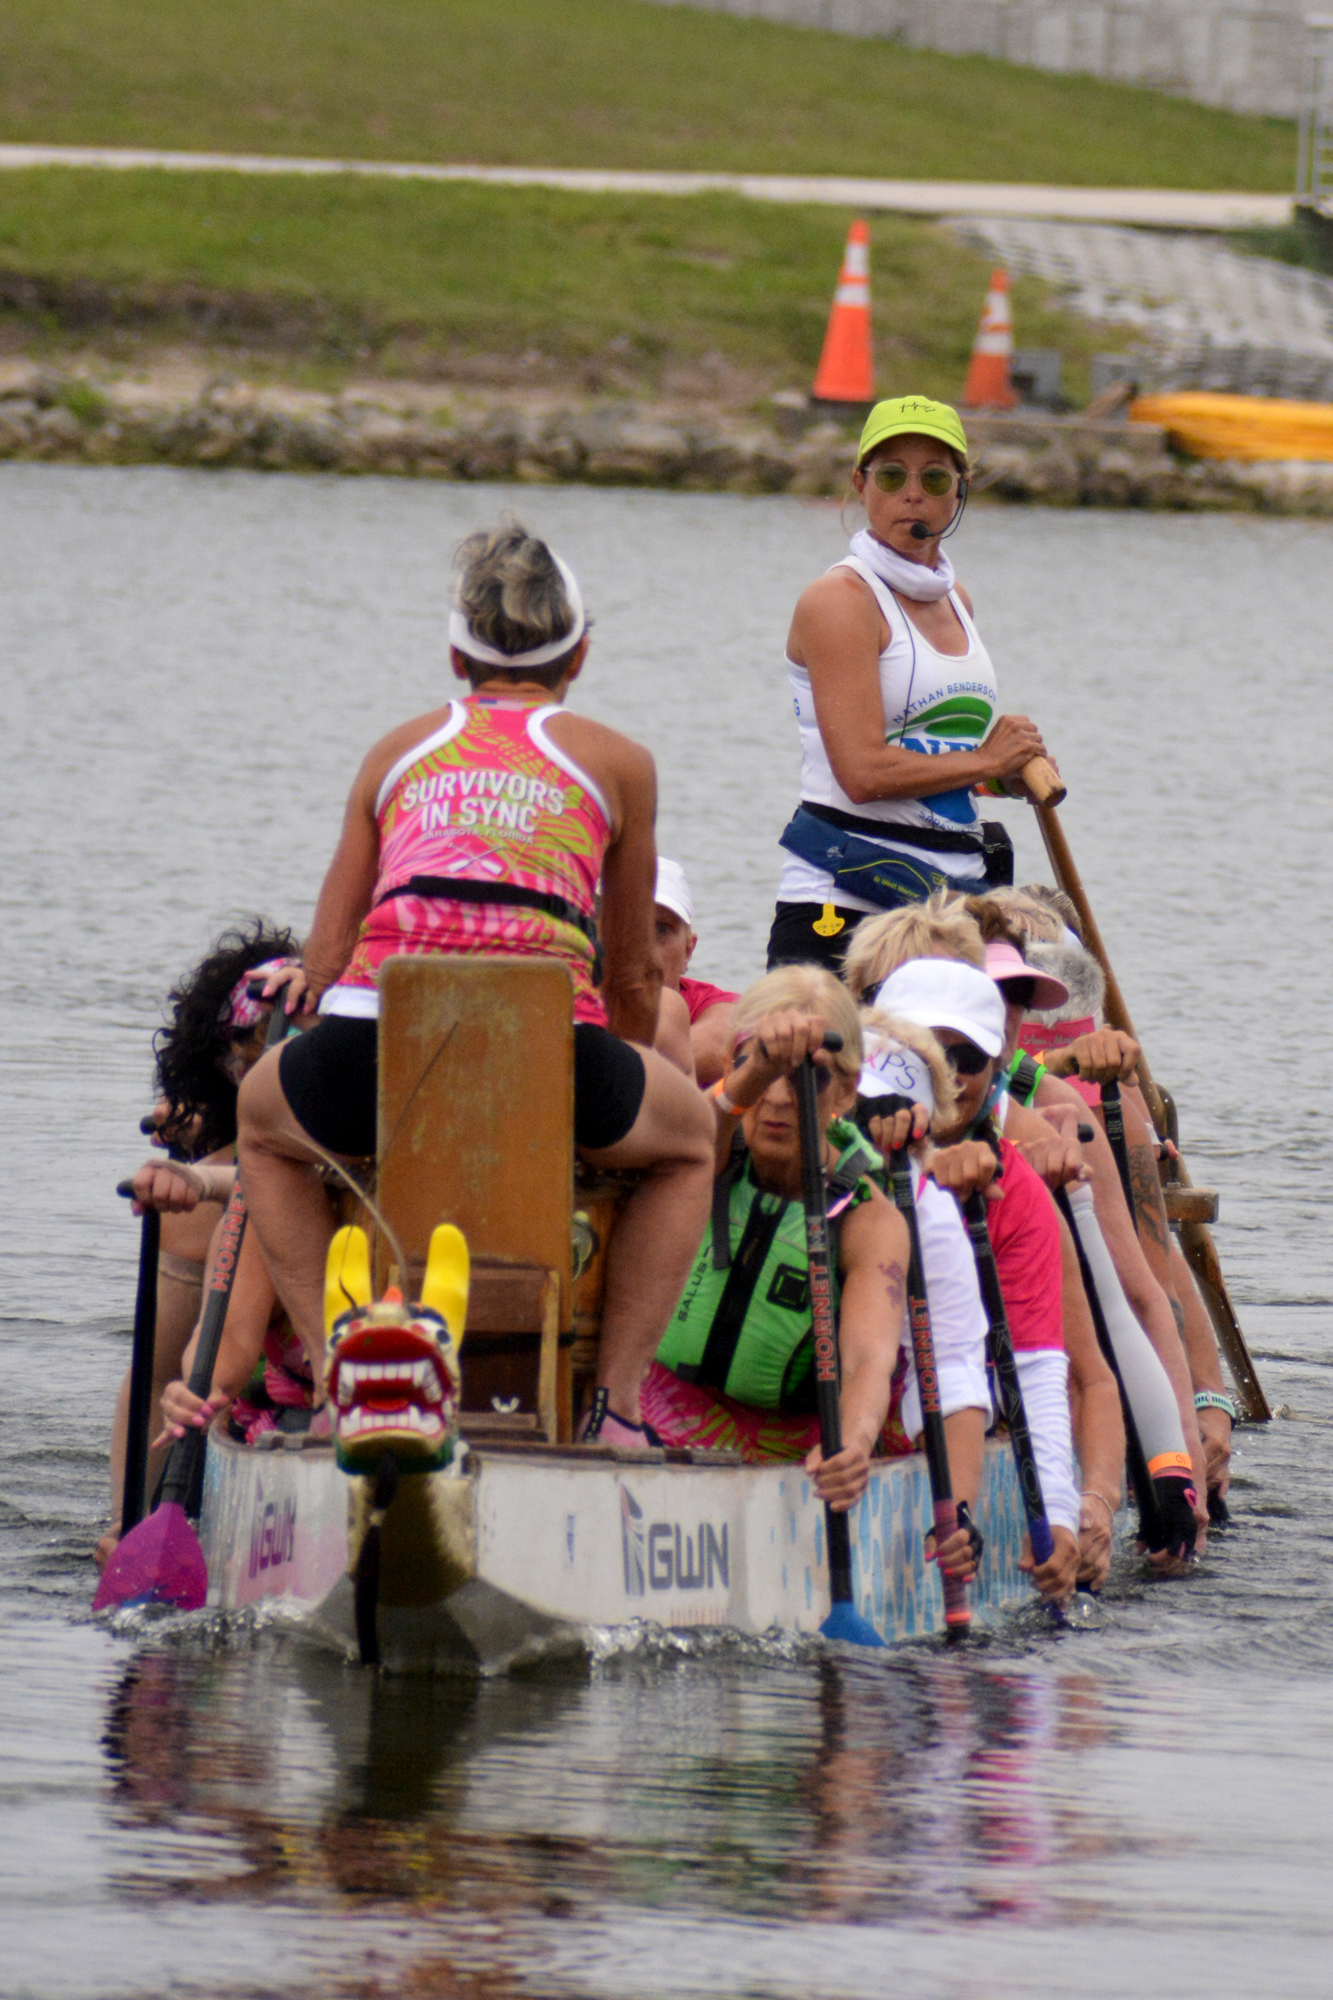 Head Coach Angela Long and the Survivors in Sync breast cancer survivor dragon boat team, here competing at May's Sarasota International Dragon Boat Festival, will be competing at the 2022 IBDF Club Crew World Championships.